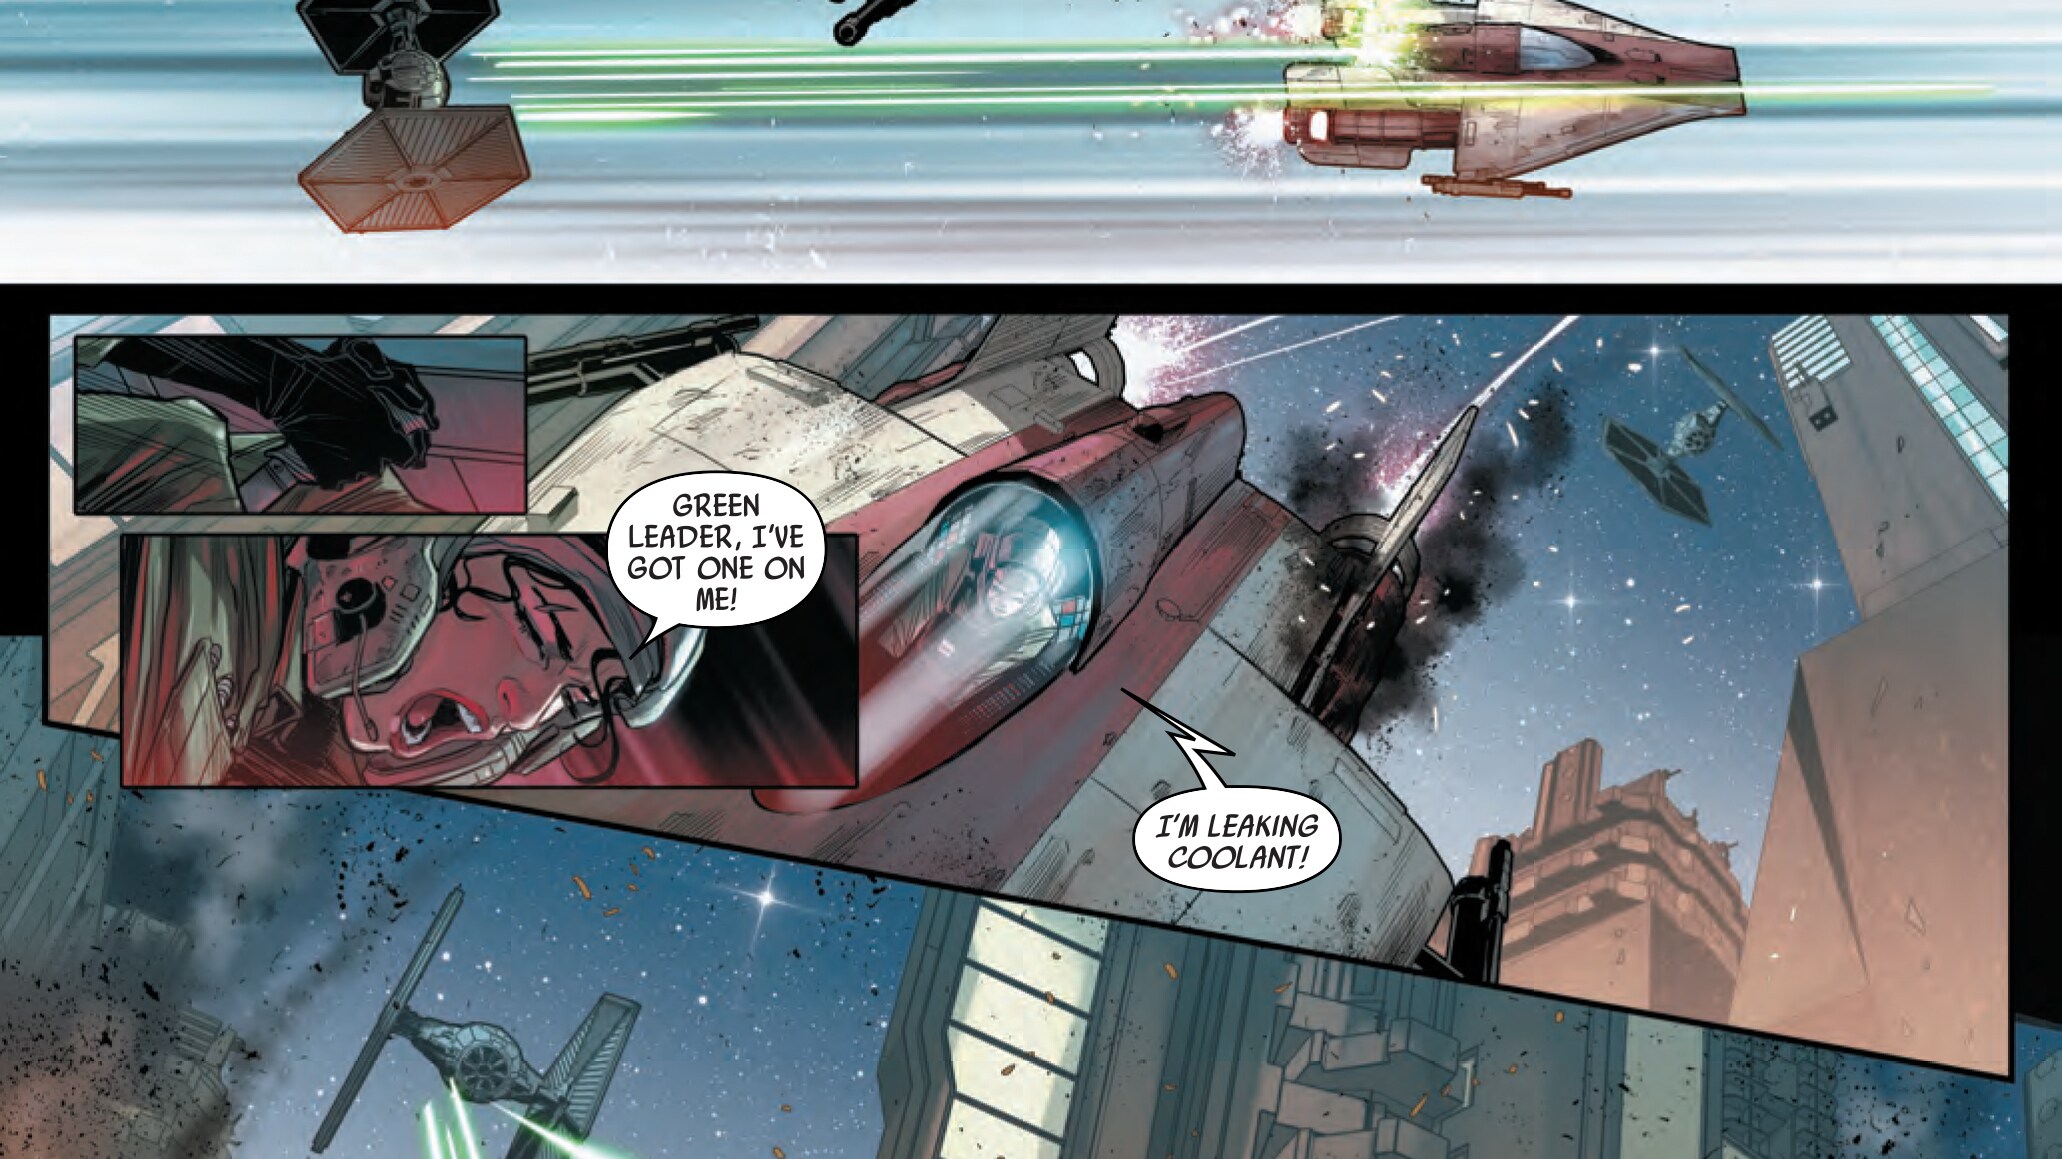 Star Wars Shattered Empire #2 - A-Wing vs TIE fighter